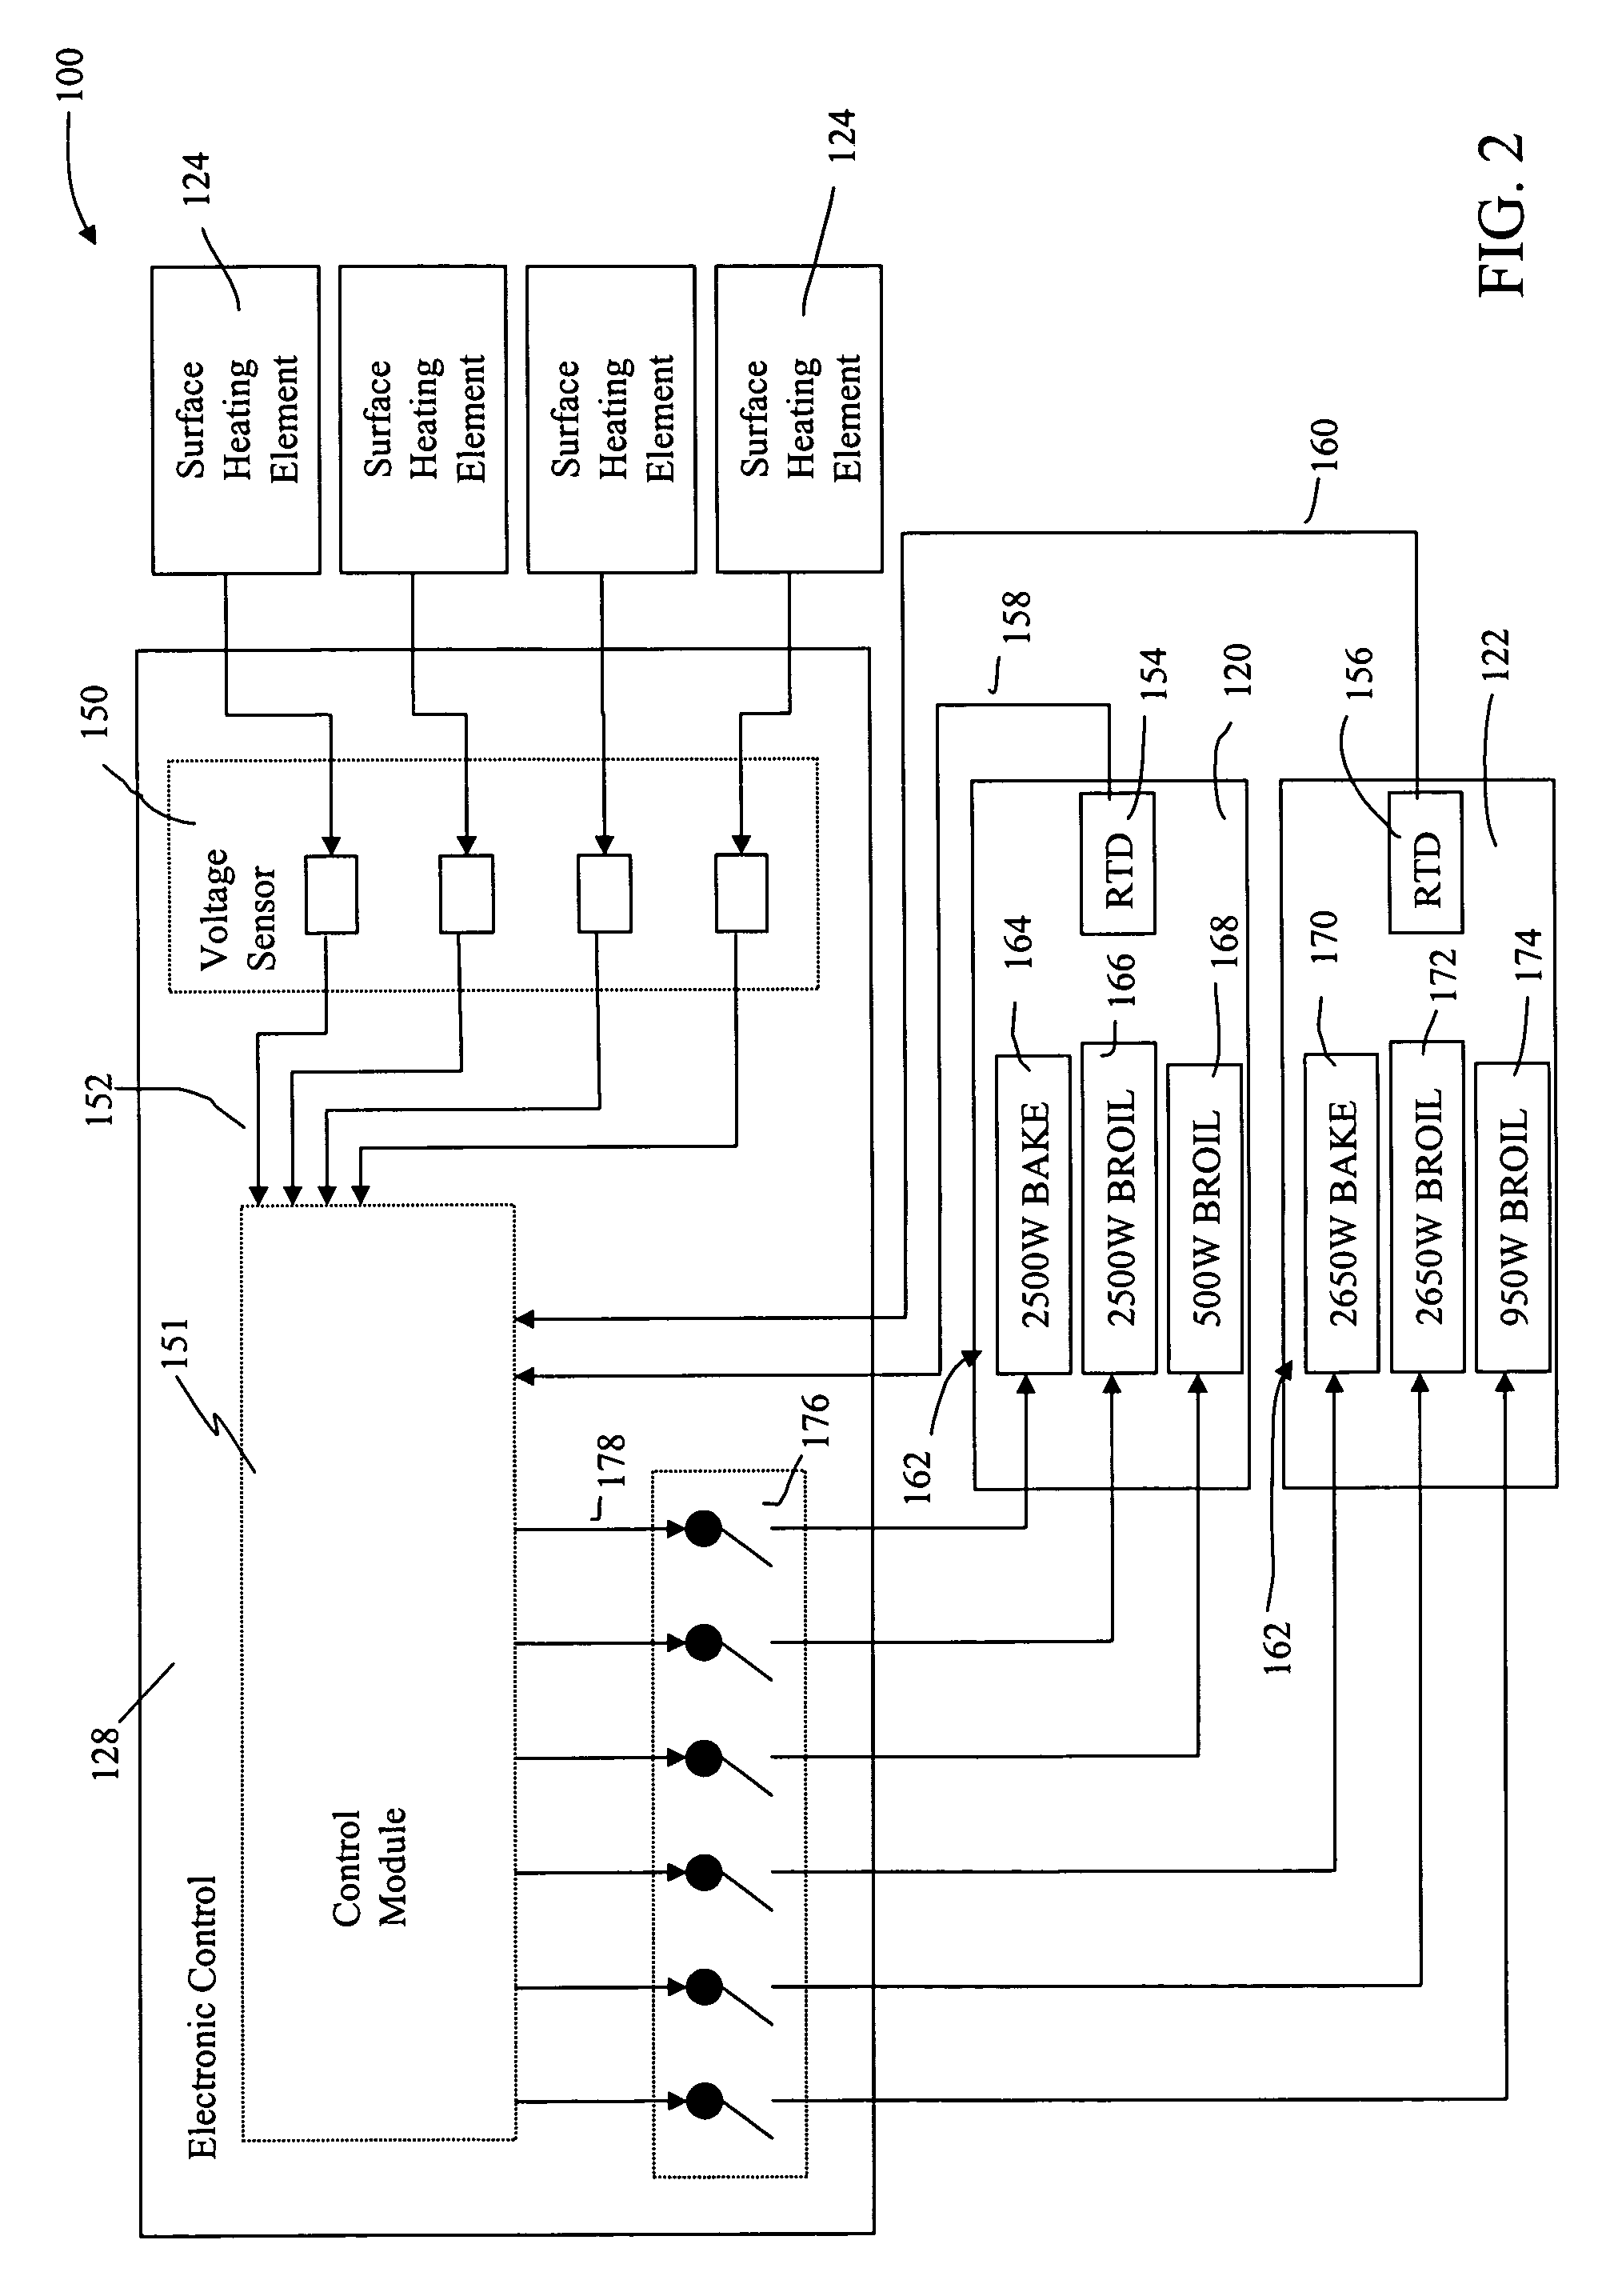 Apparatus and methods for operating an electric appliance